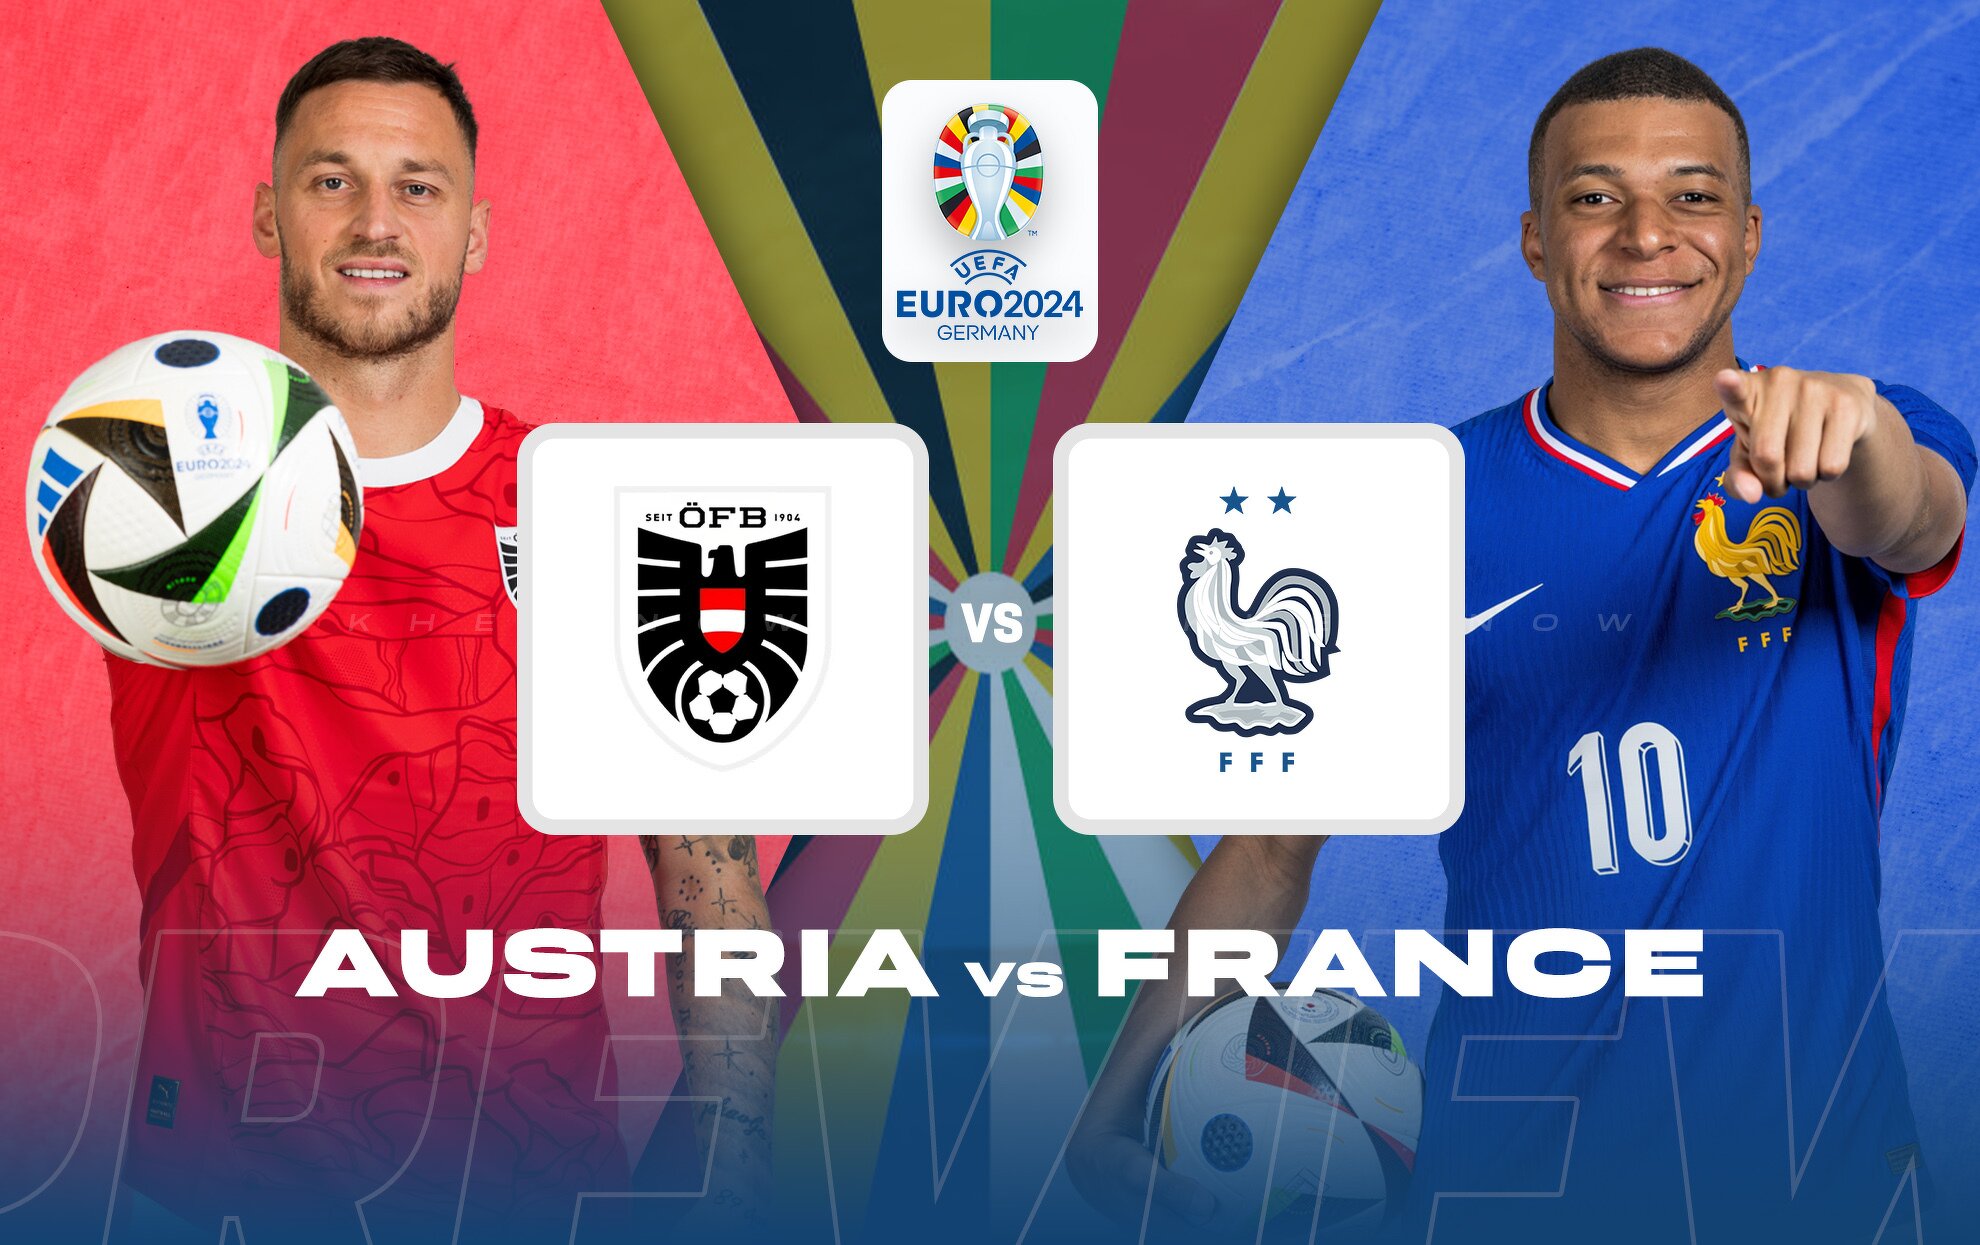 Austria vs France Live streaming, TV channel, kickoff time & where to